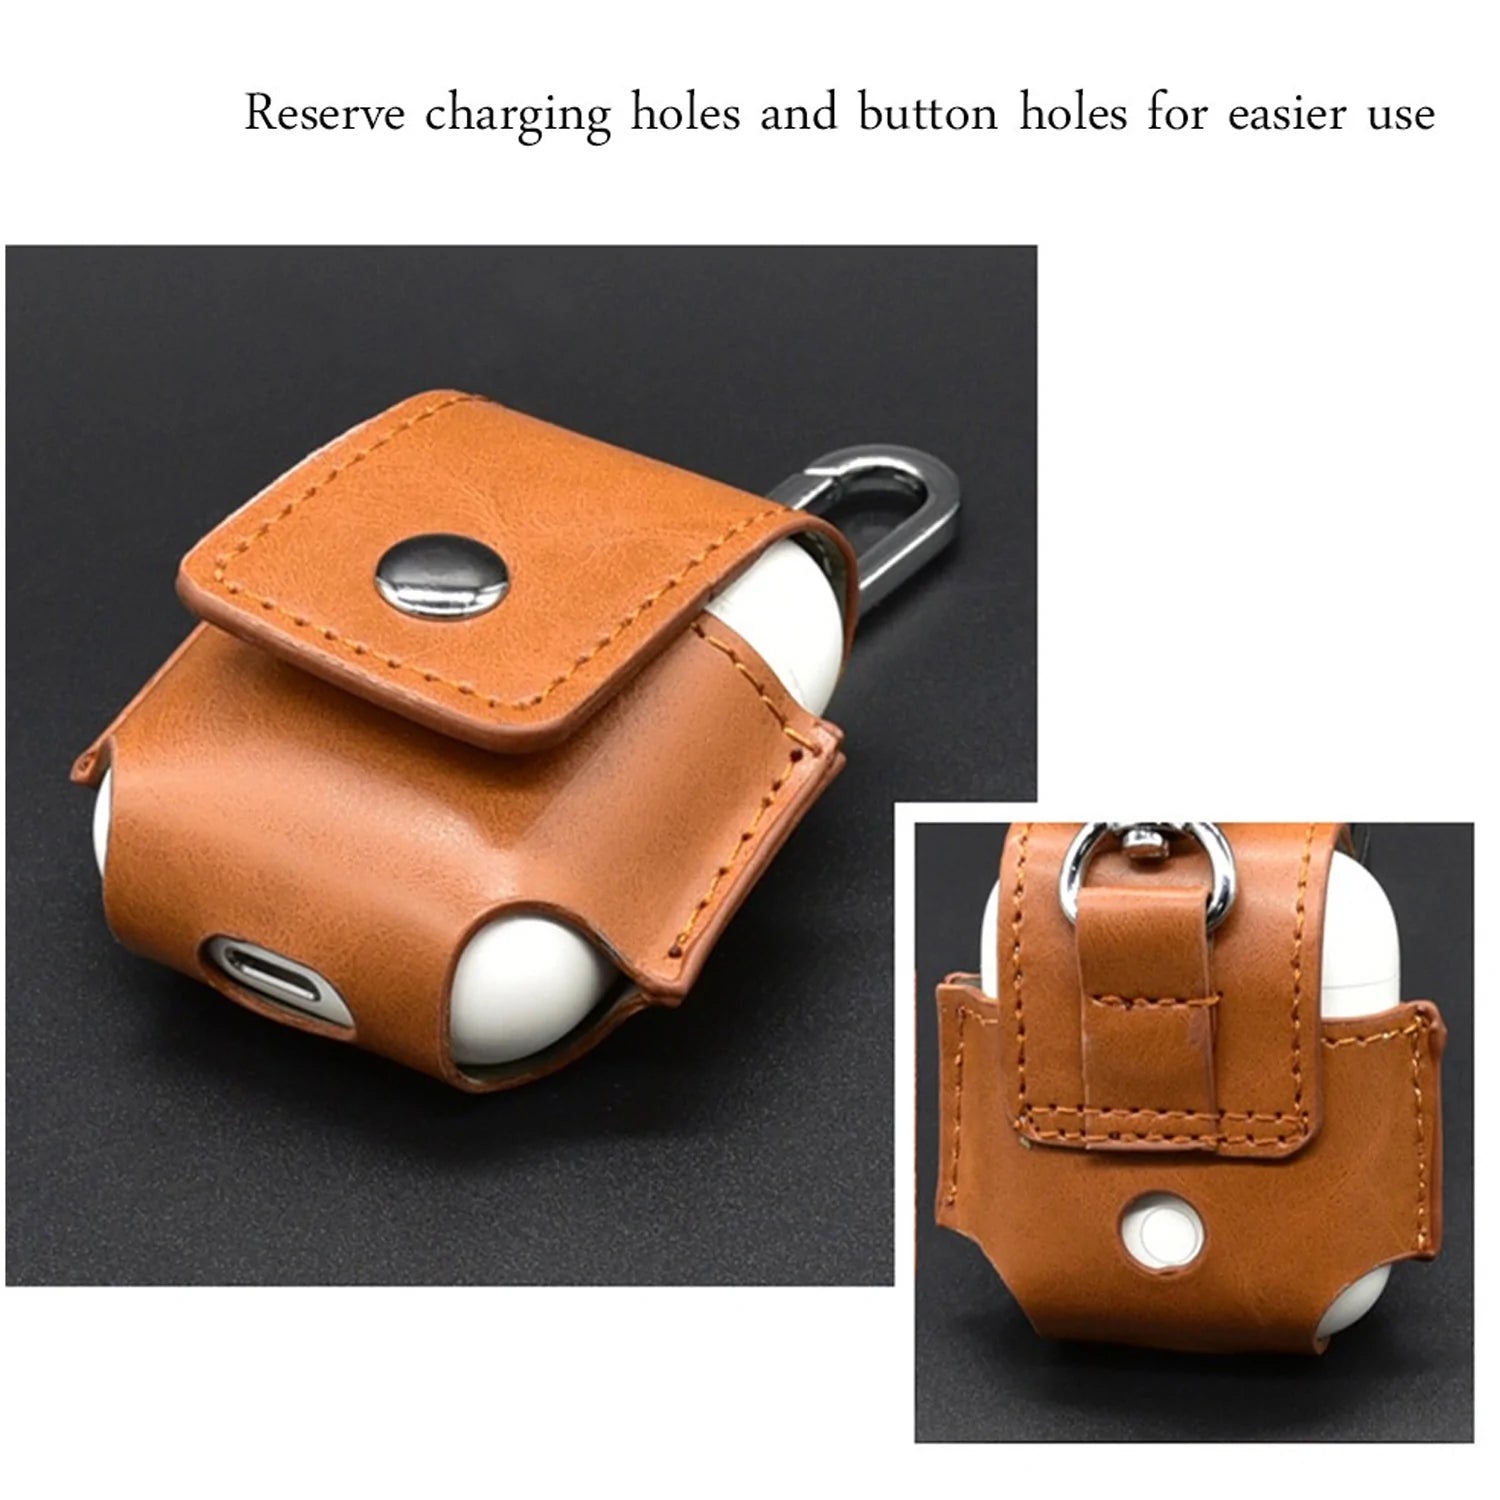 6630 Leather Headphones AirPods Case Designed for Apple AirPods DeoDap